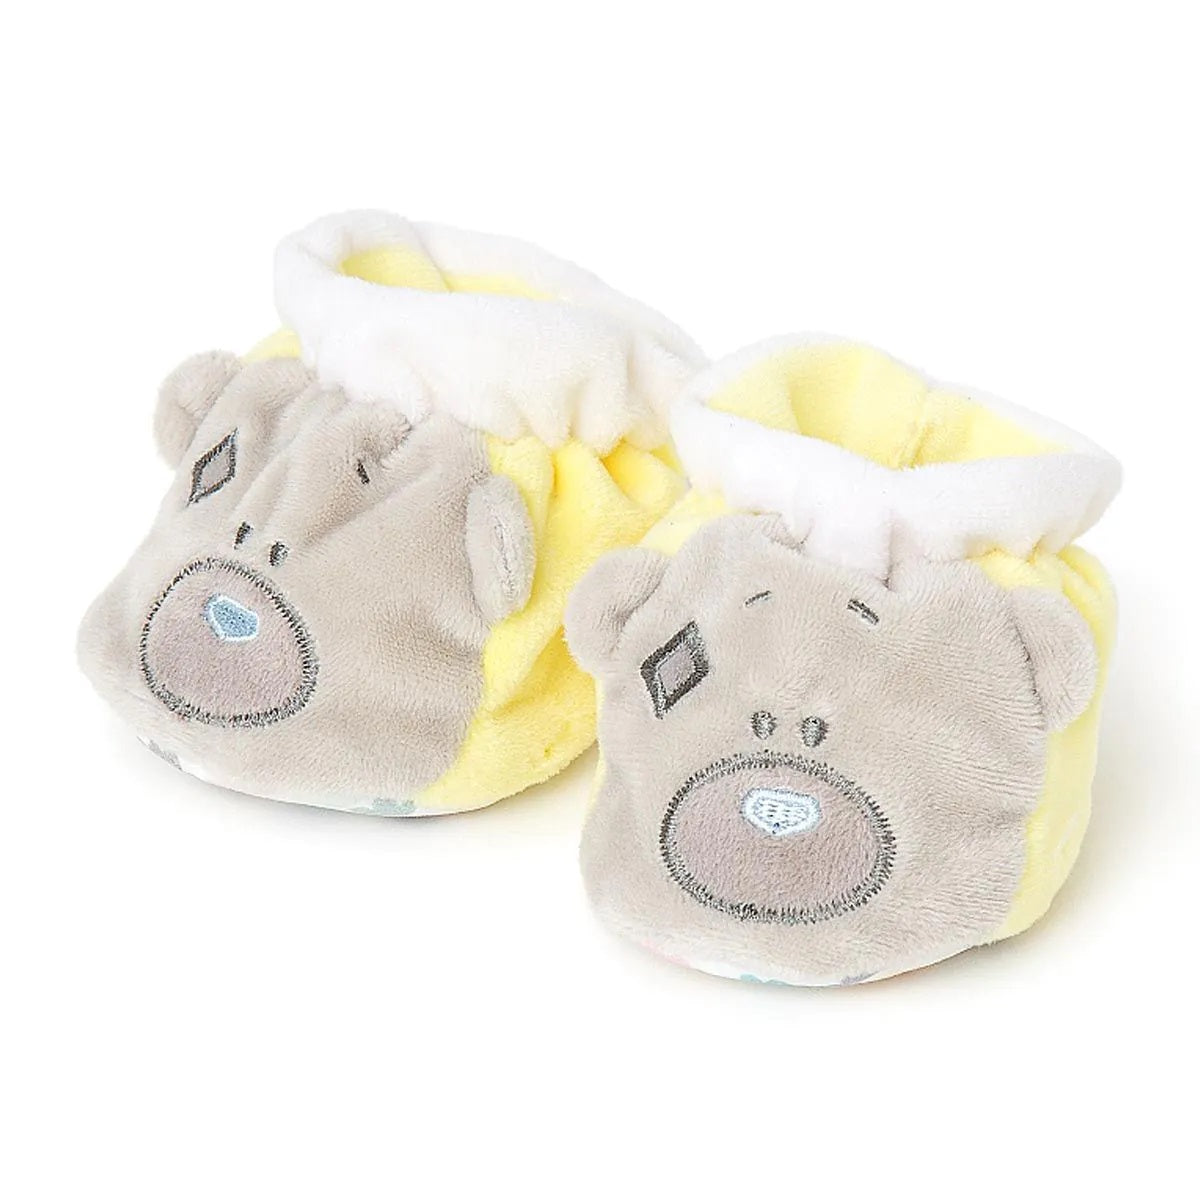 Tiny Tatty Teddy Me to You Boxed Baby Booties Size 3-6 mths